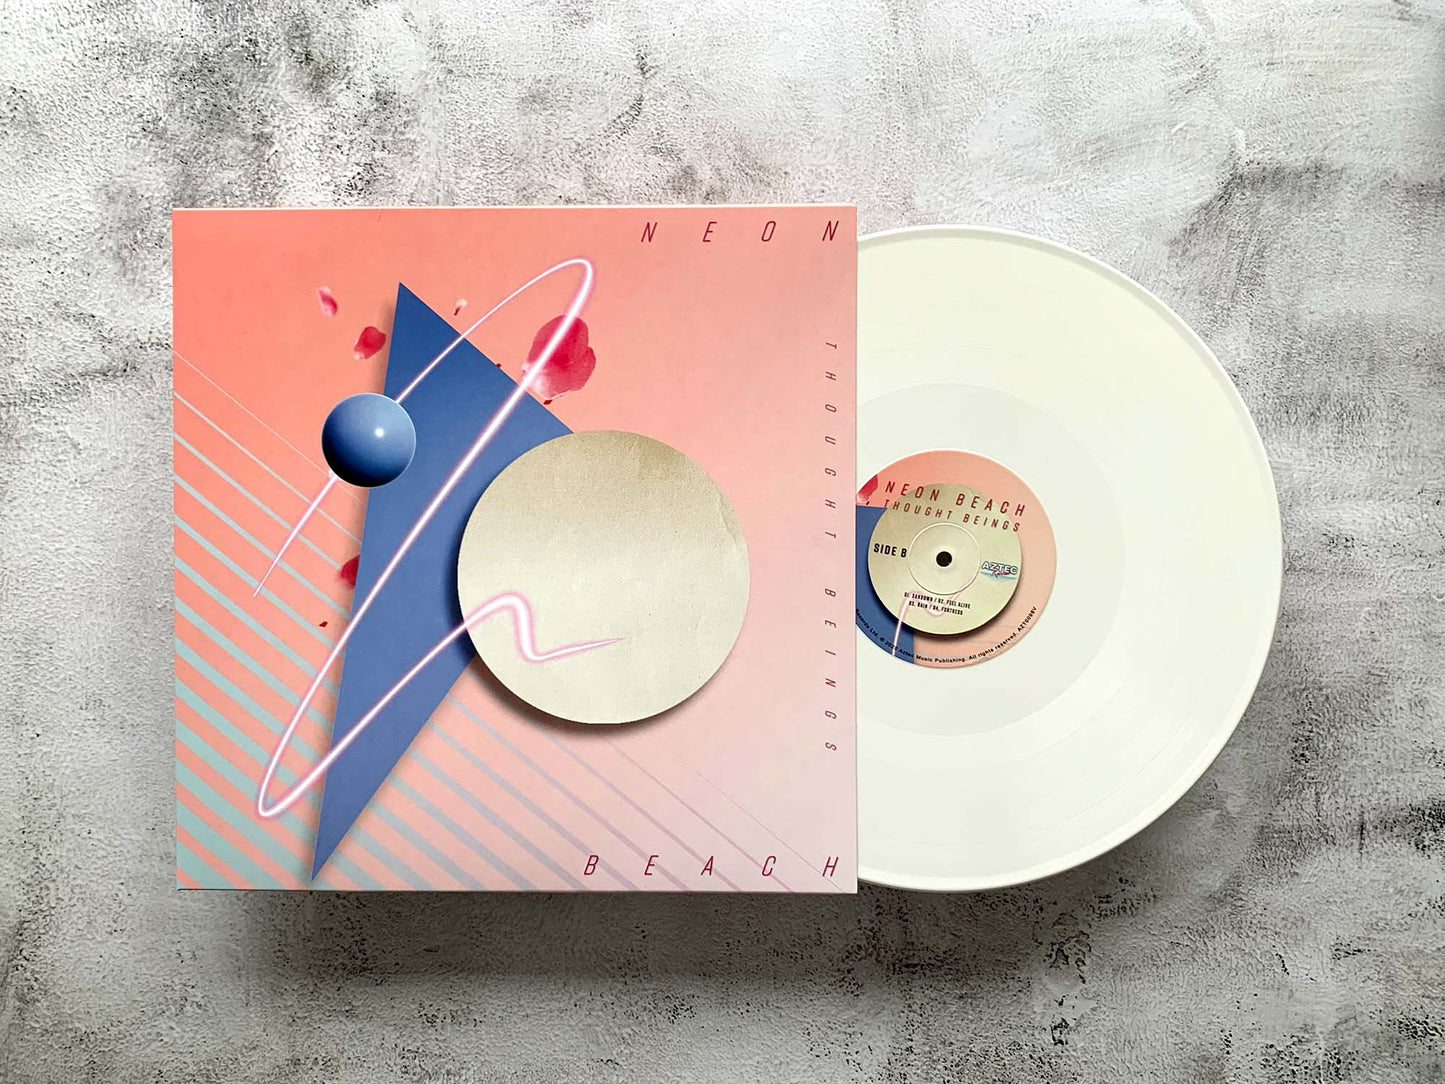 THOUGHT BEINGS - Neon Beach 12" - Heavy Duty WHITE VINYL